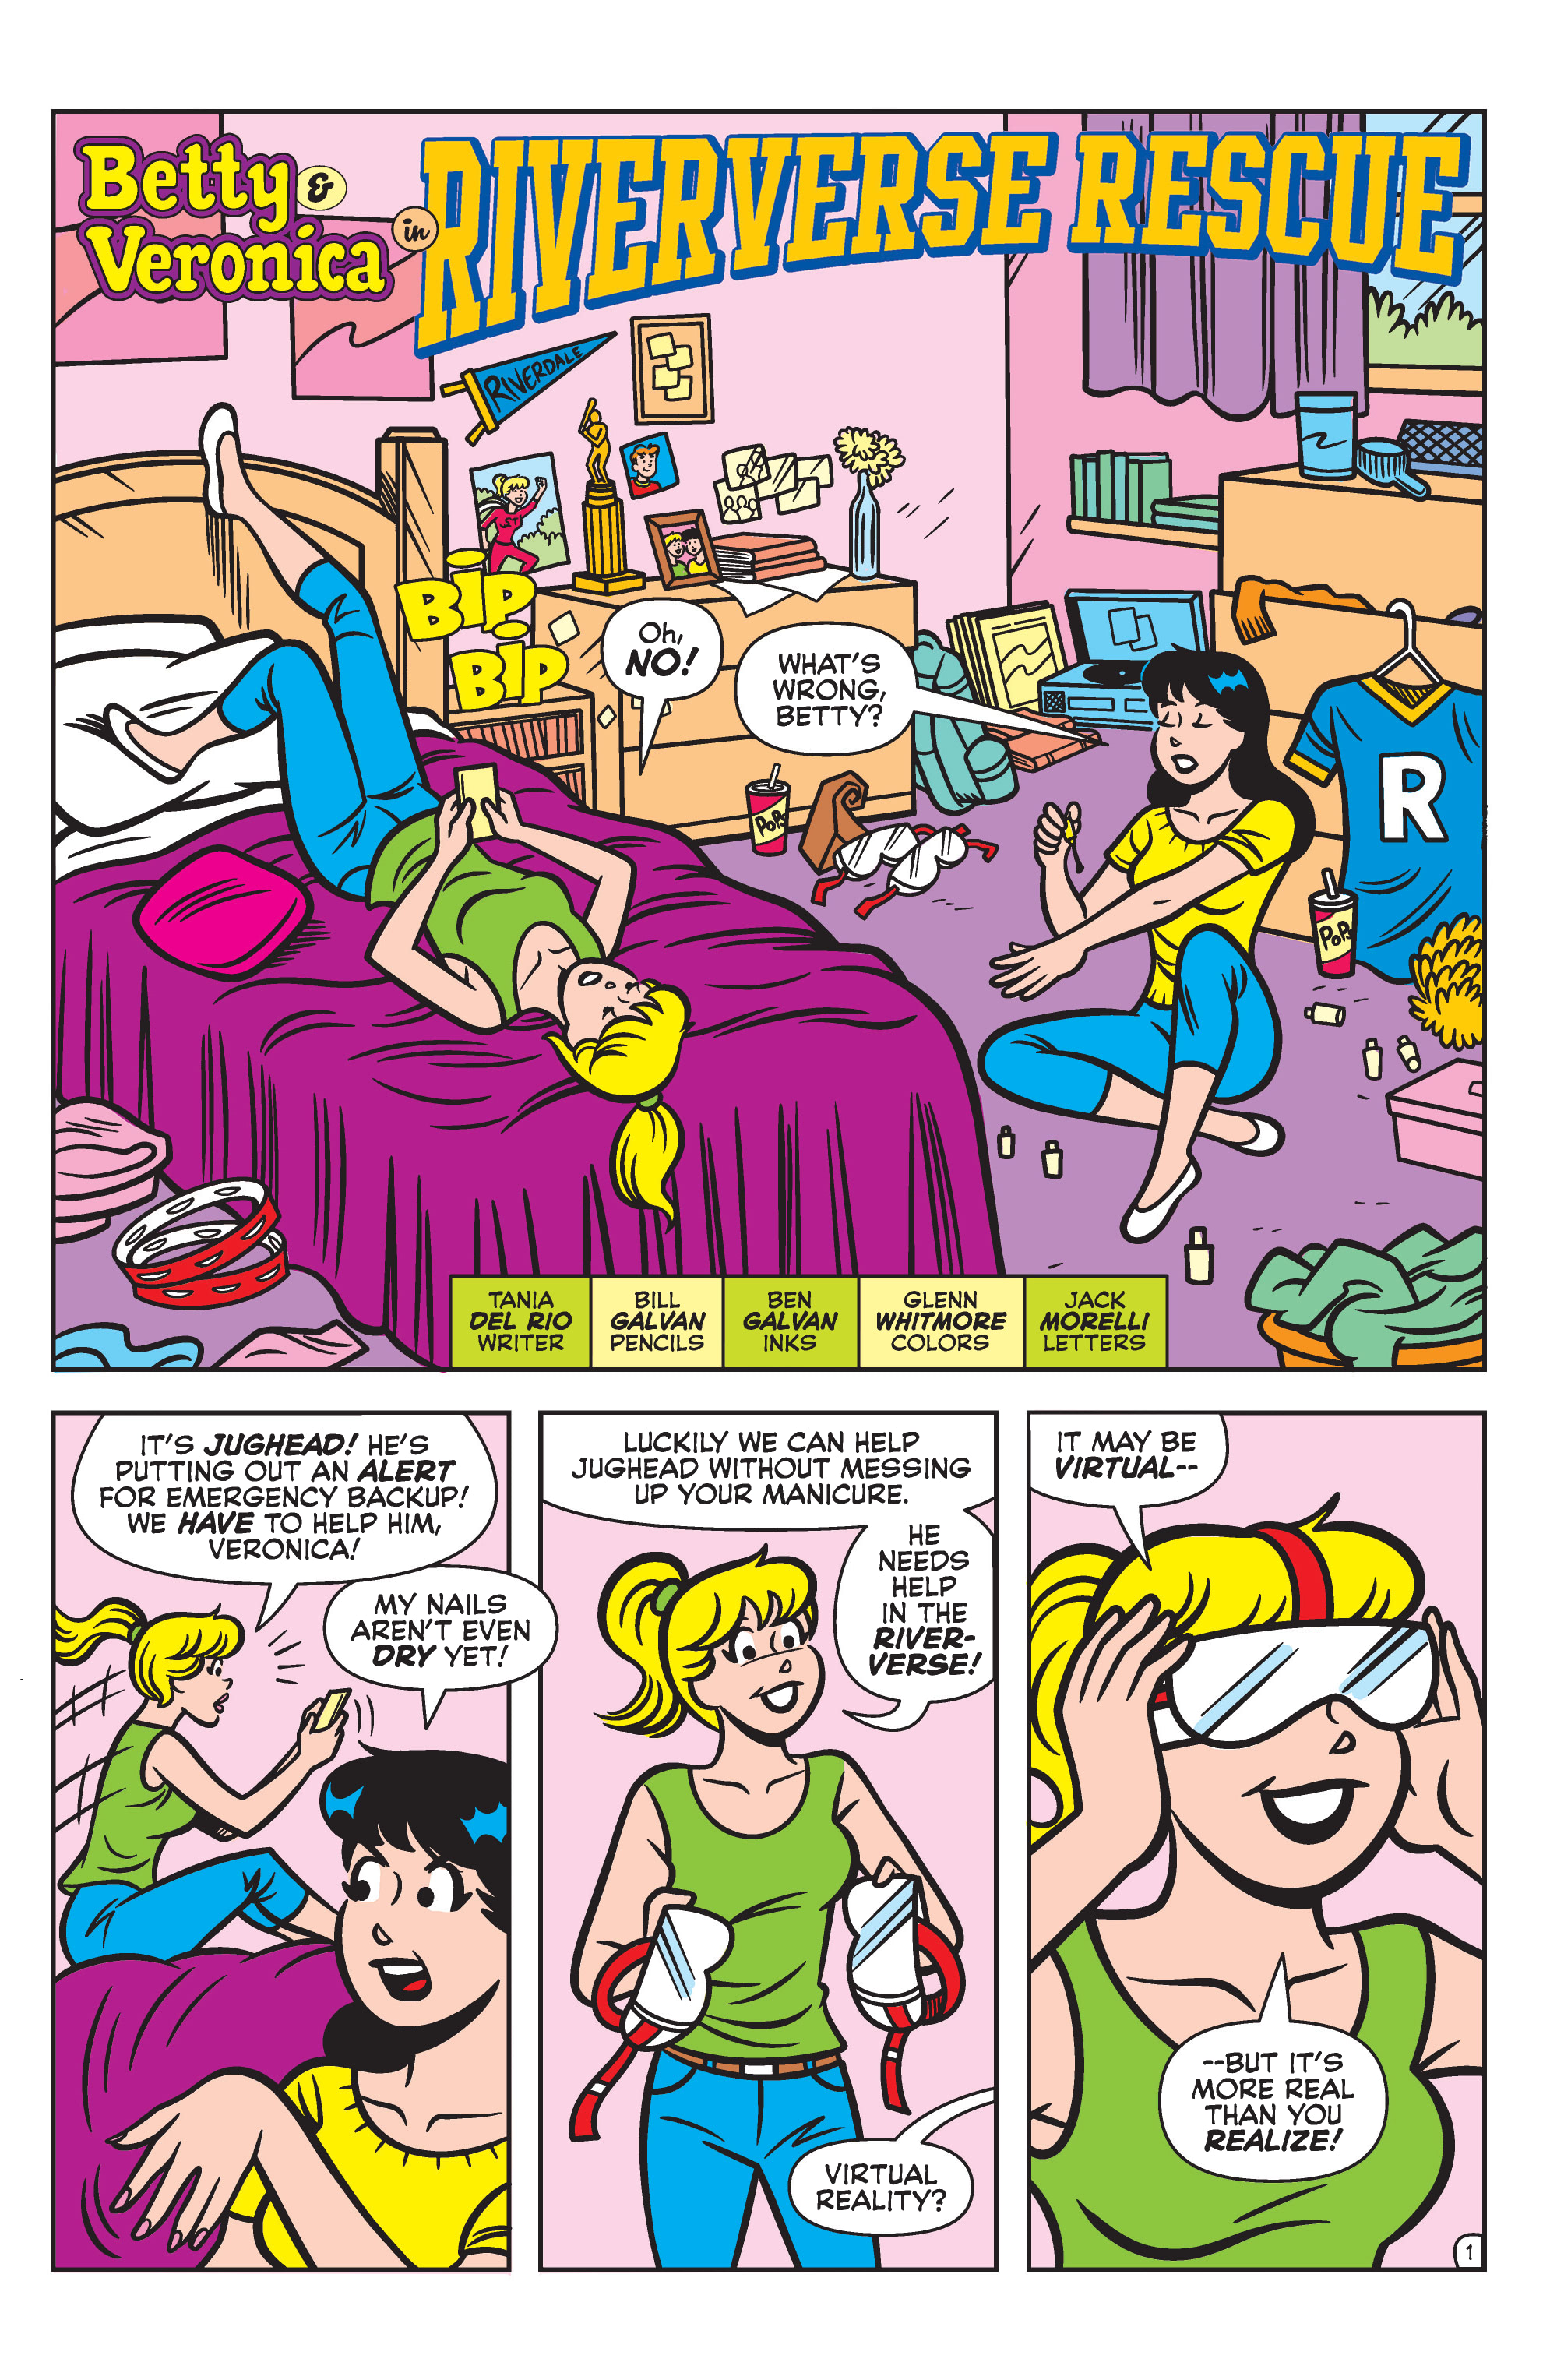 Betty and Veronica Friends Forever: Power-Ups #1 Reviews